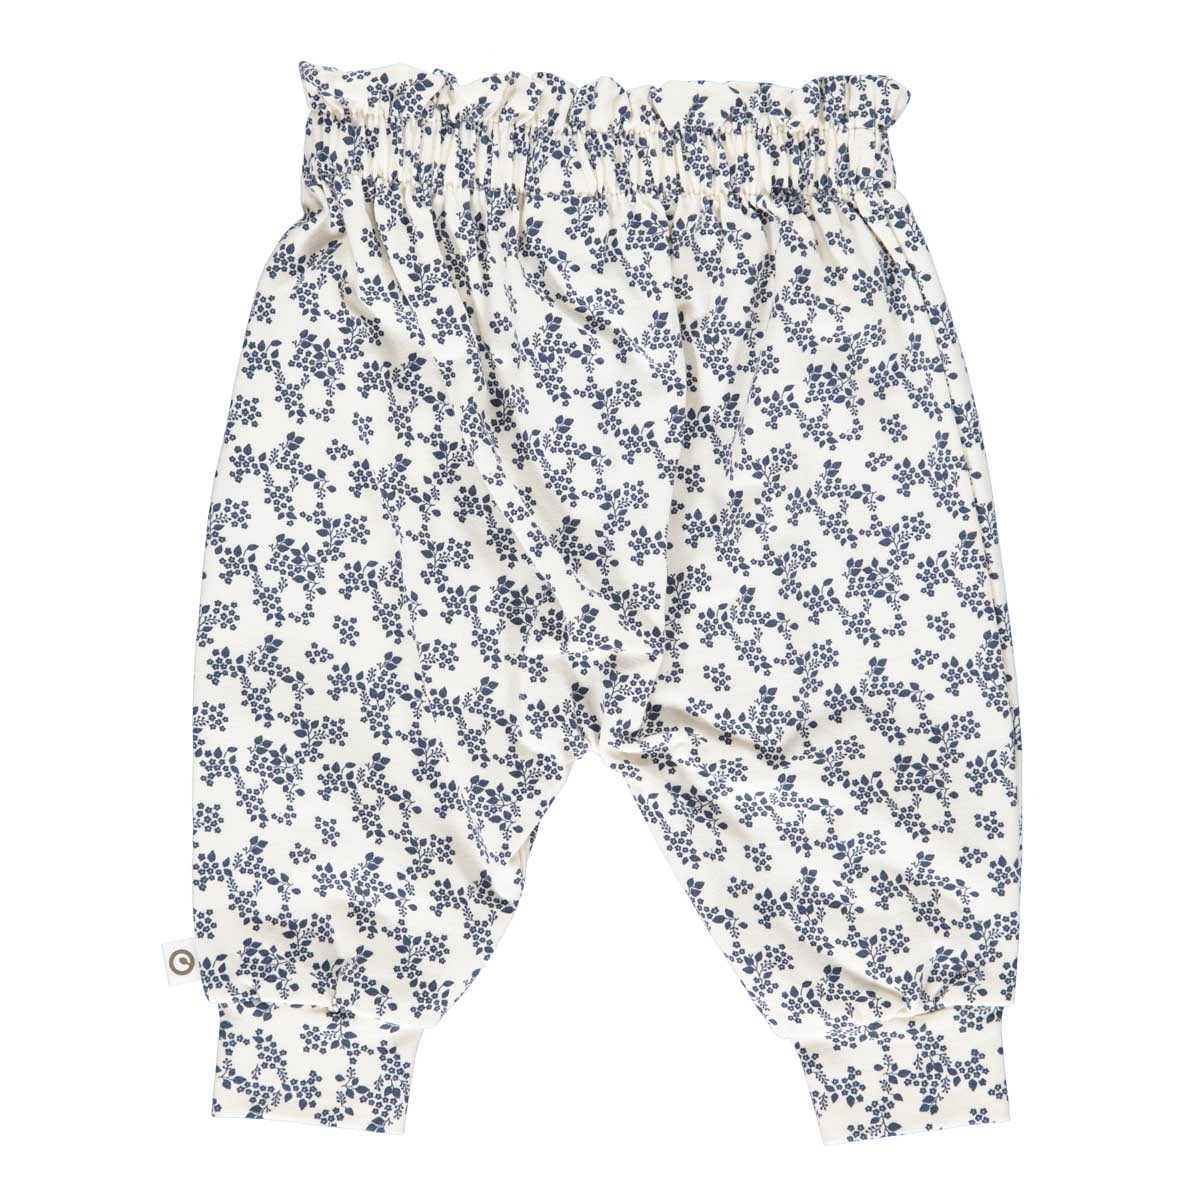 MAMA.LICIOUS Baby-trousers -Midnight - 1535079900